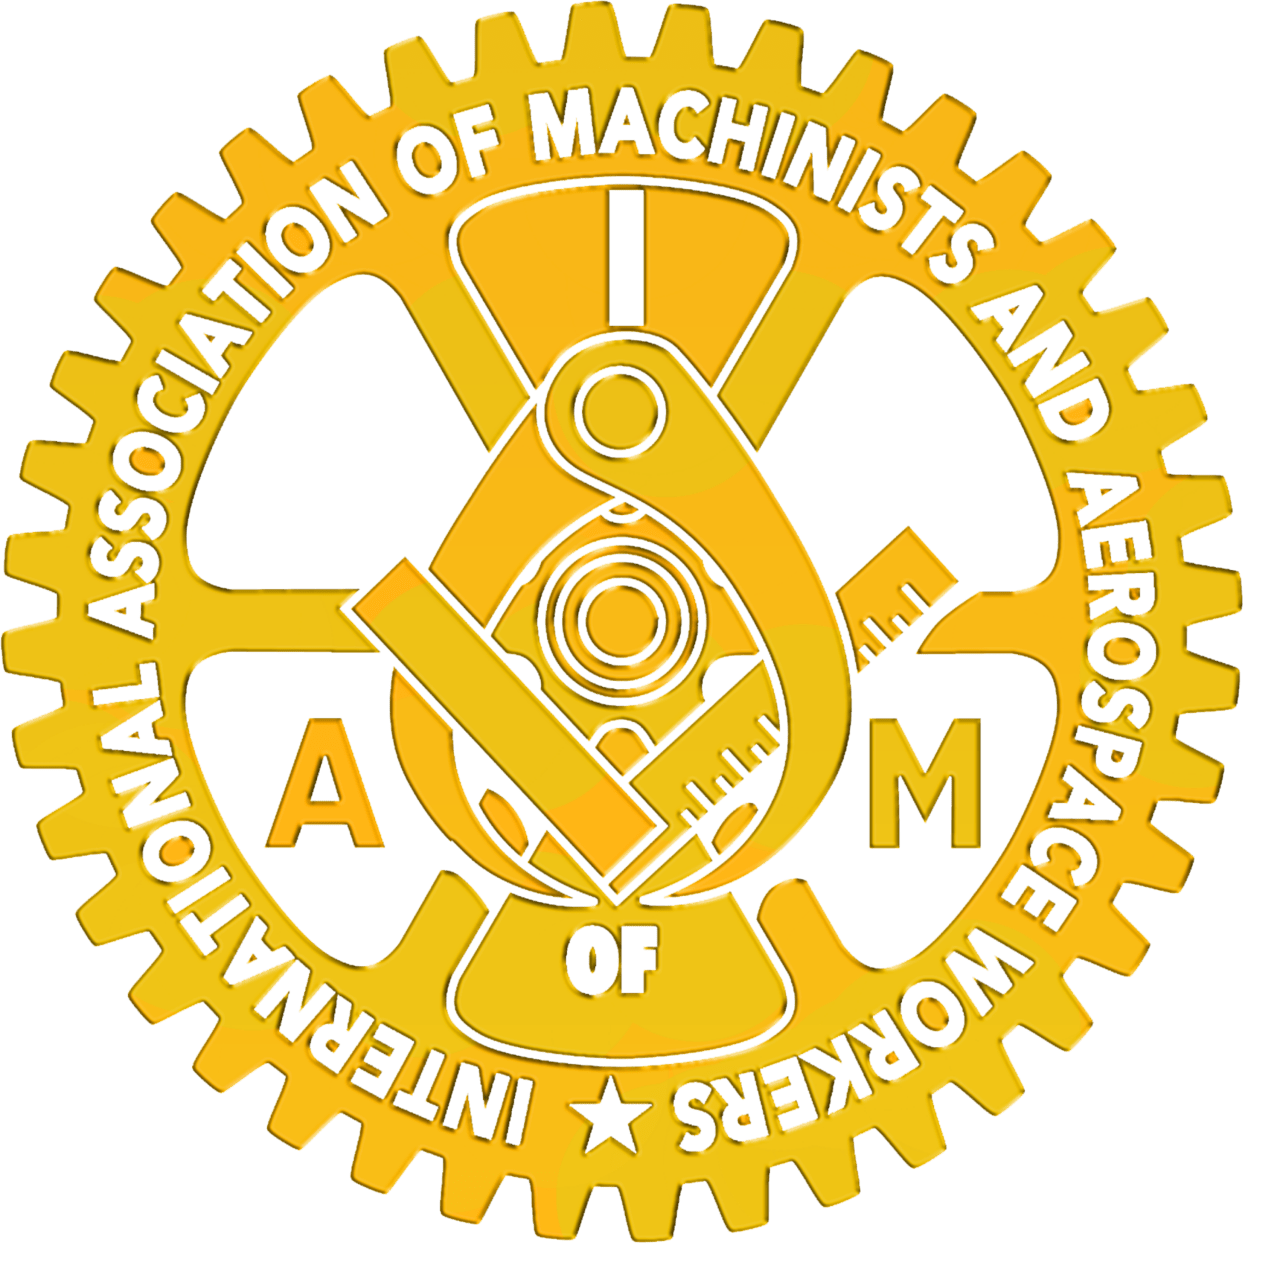 The IAMAW Seal and Emblem - IAM District 141